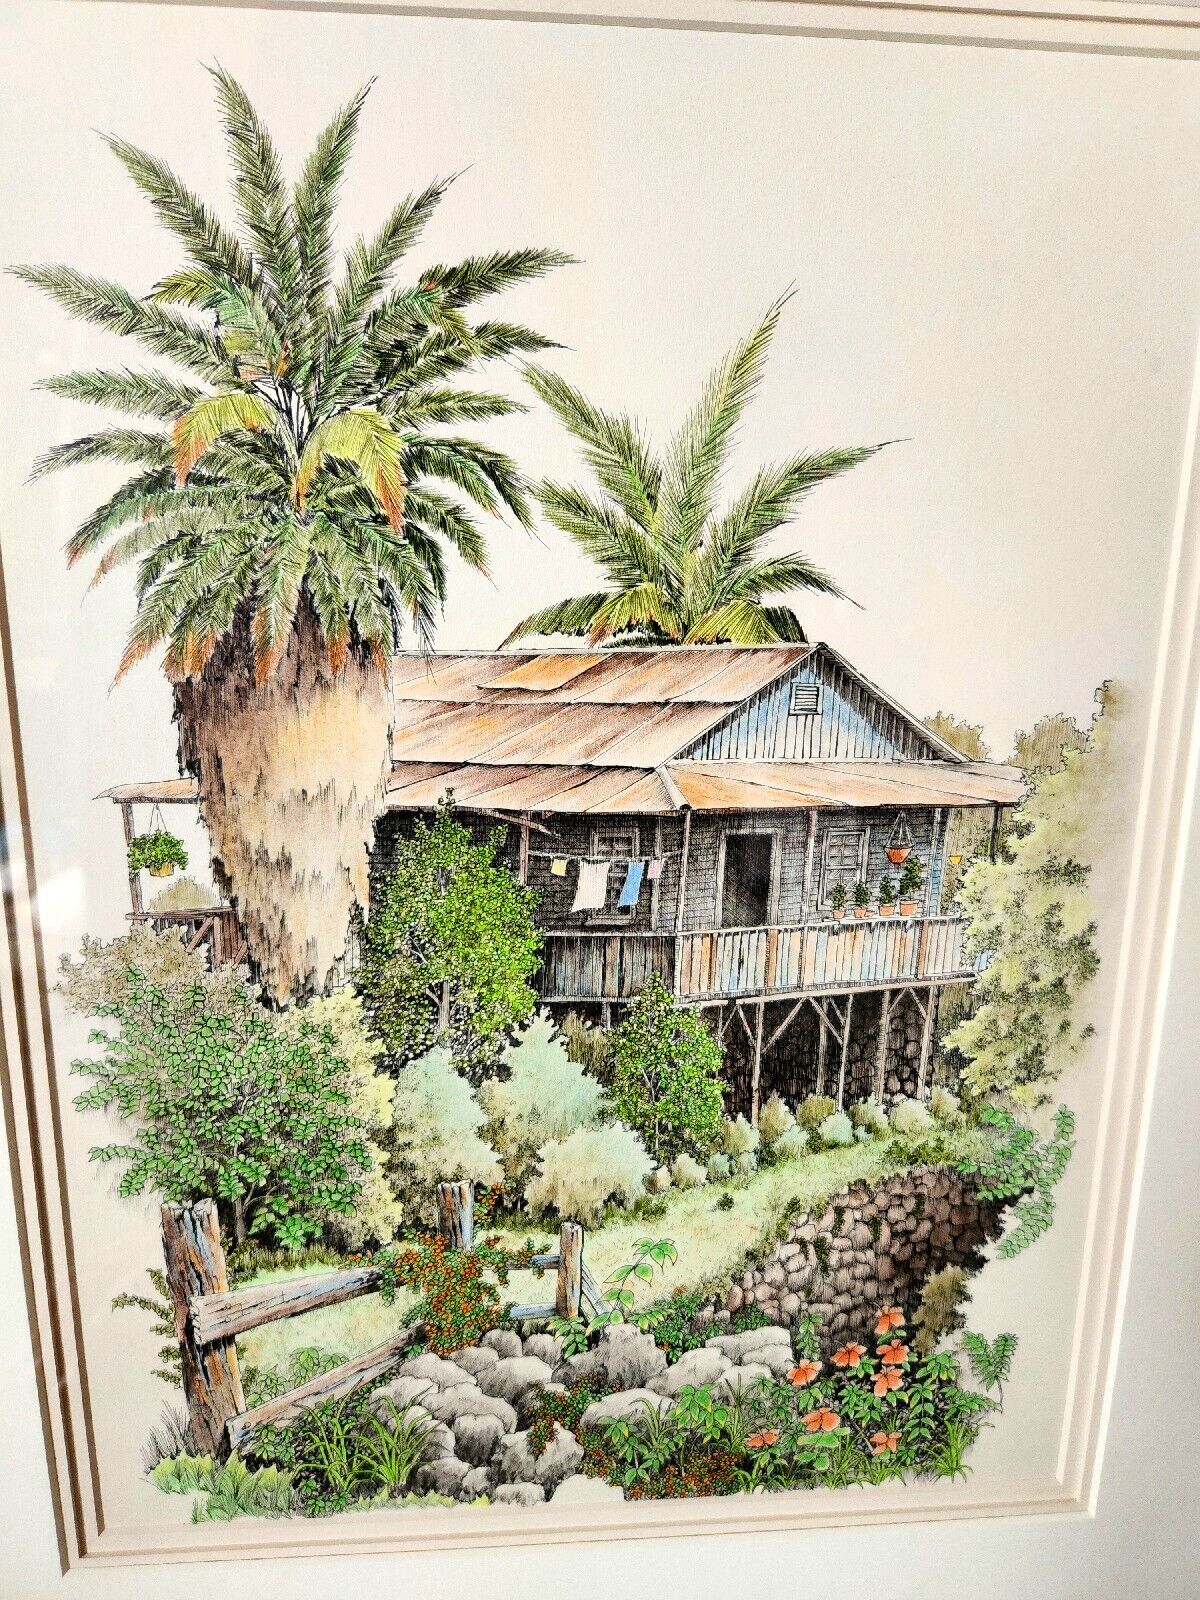 AUTH Original & Signed Pastel on Ink, Kona House by Don D'Witt Honolulu Hawaii.